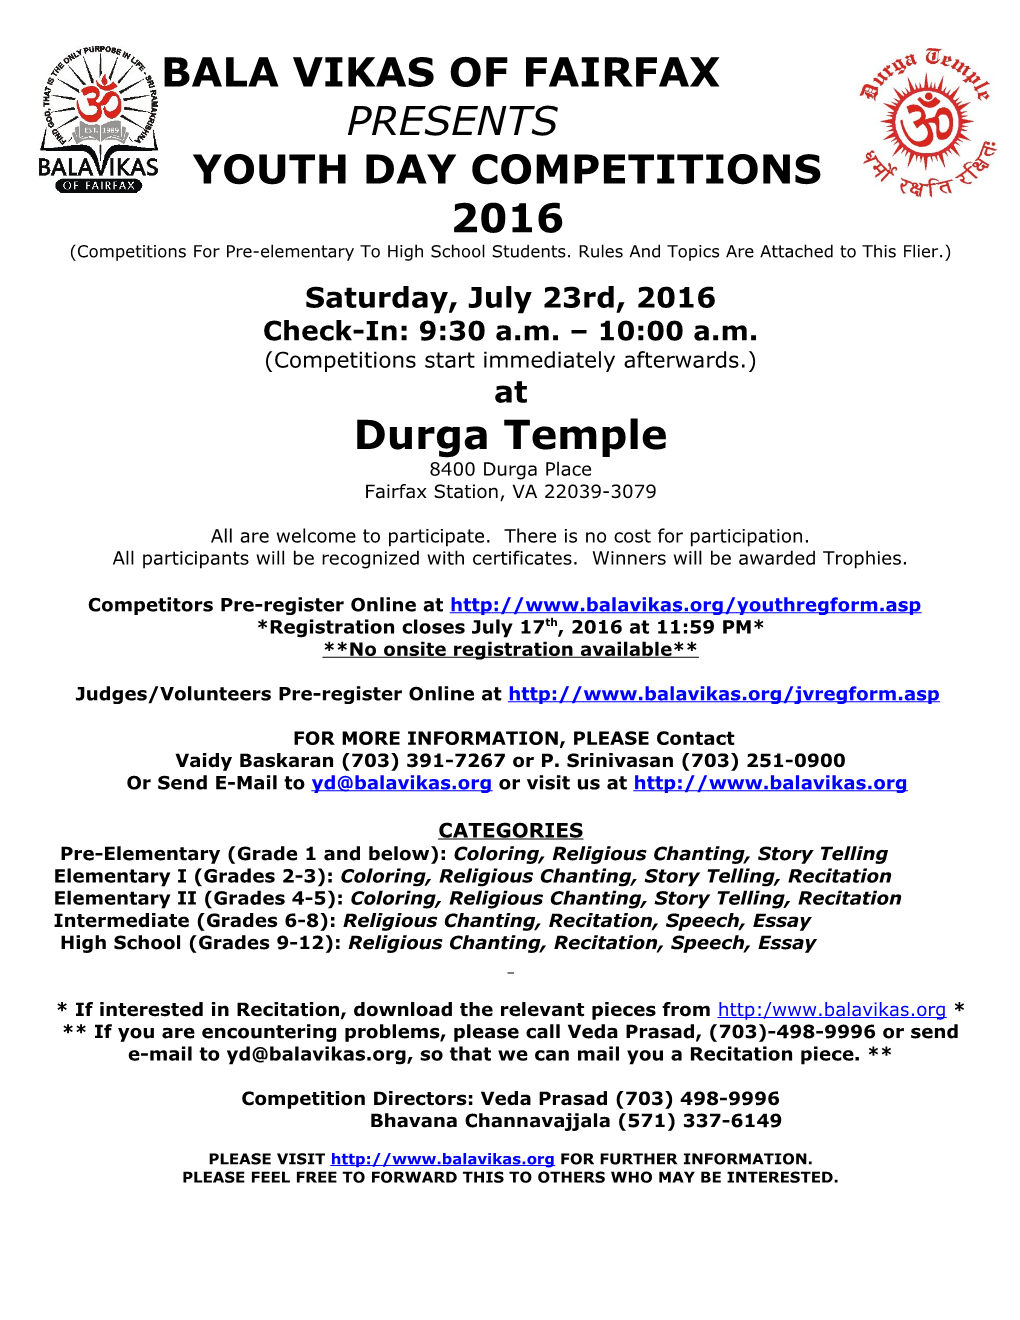 Youth Day Competitions 2016